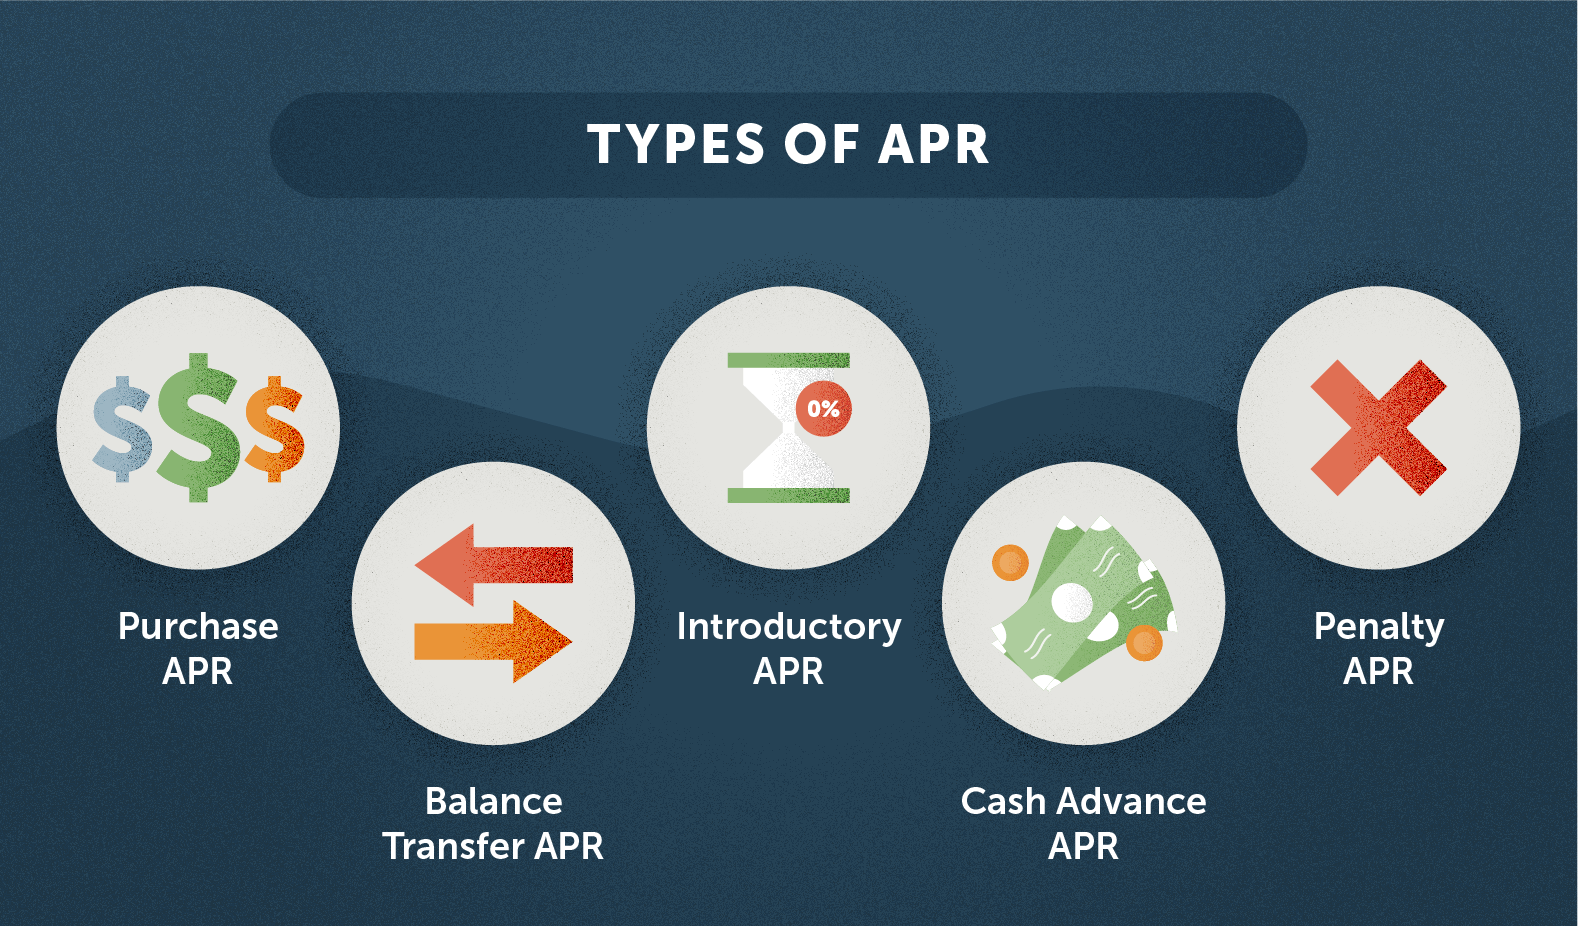 How to calculate APR (Annual Percentage Rate) on a Loan